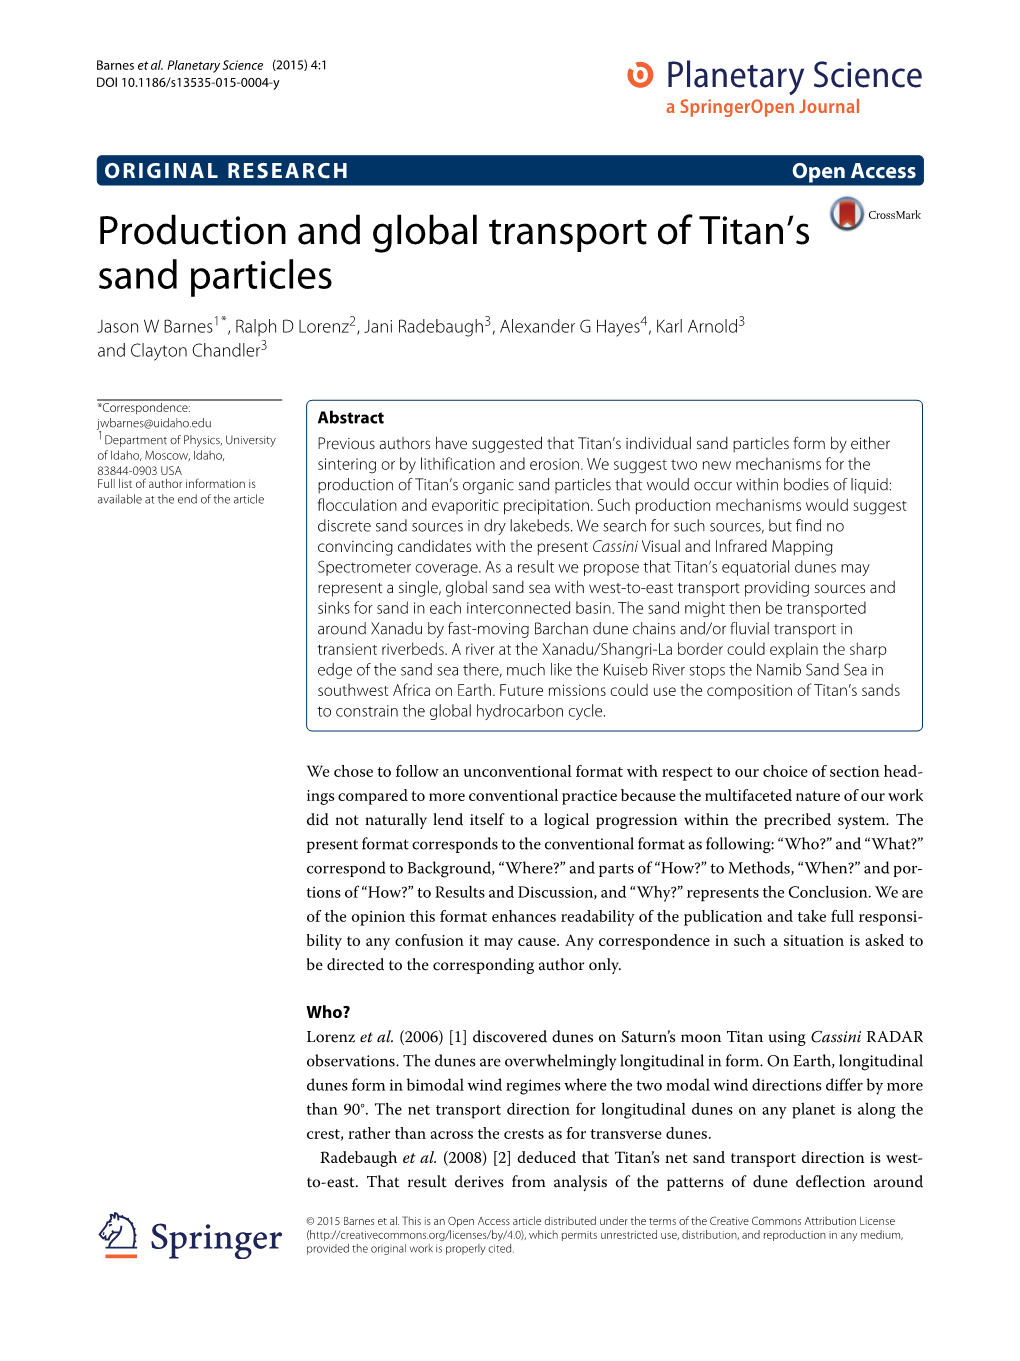 Production and Global Transport of Titan's Sand Particles